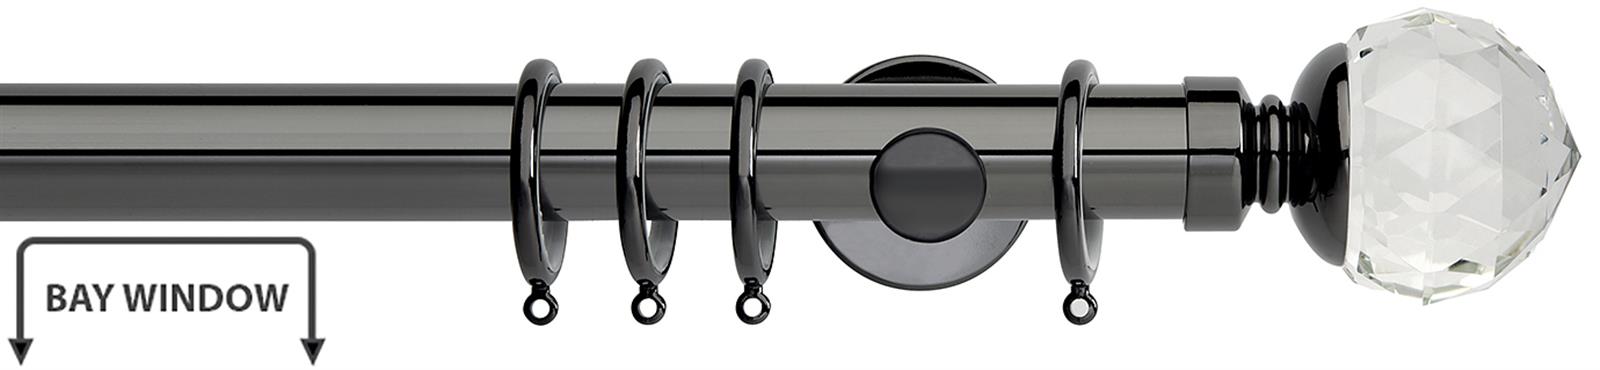 Neo Premium 35mm Bay Window Pole Black Nickel Clear Faceted Ball